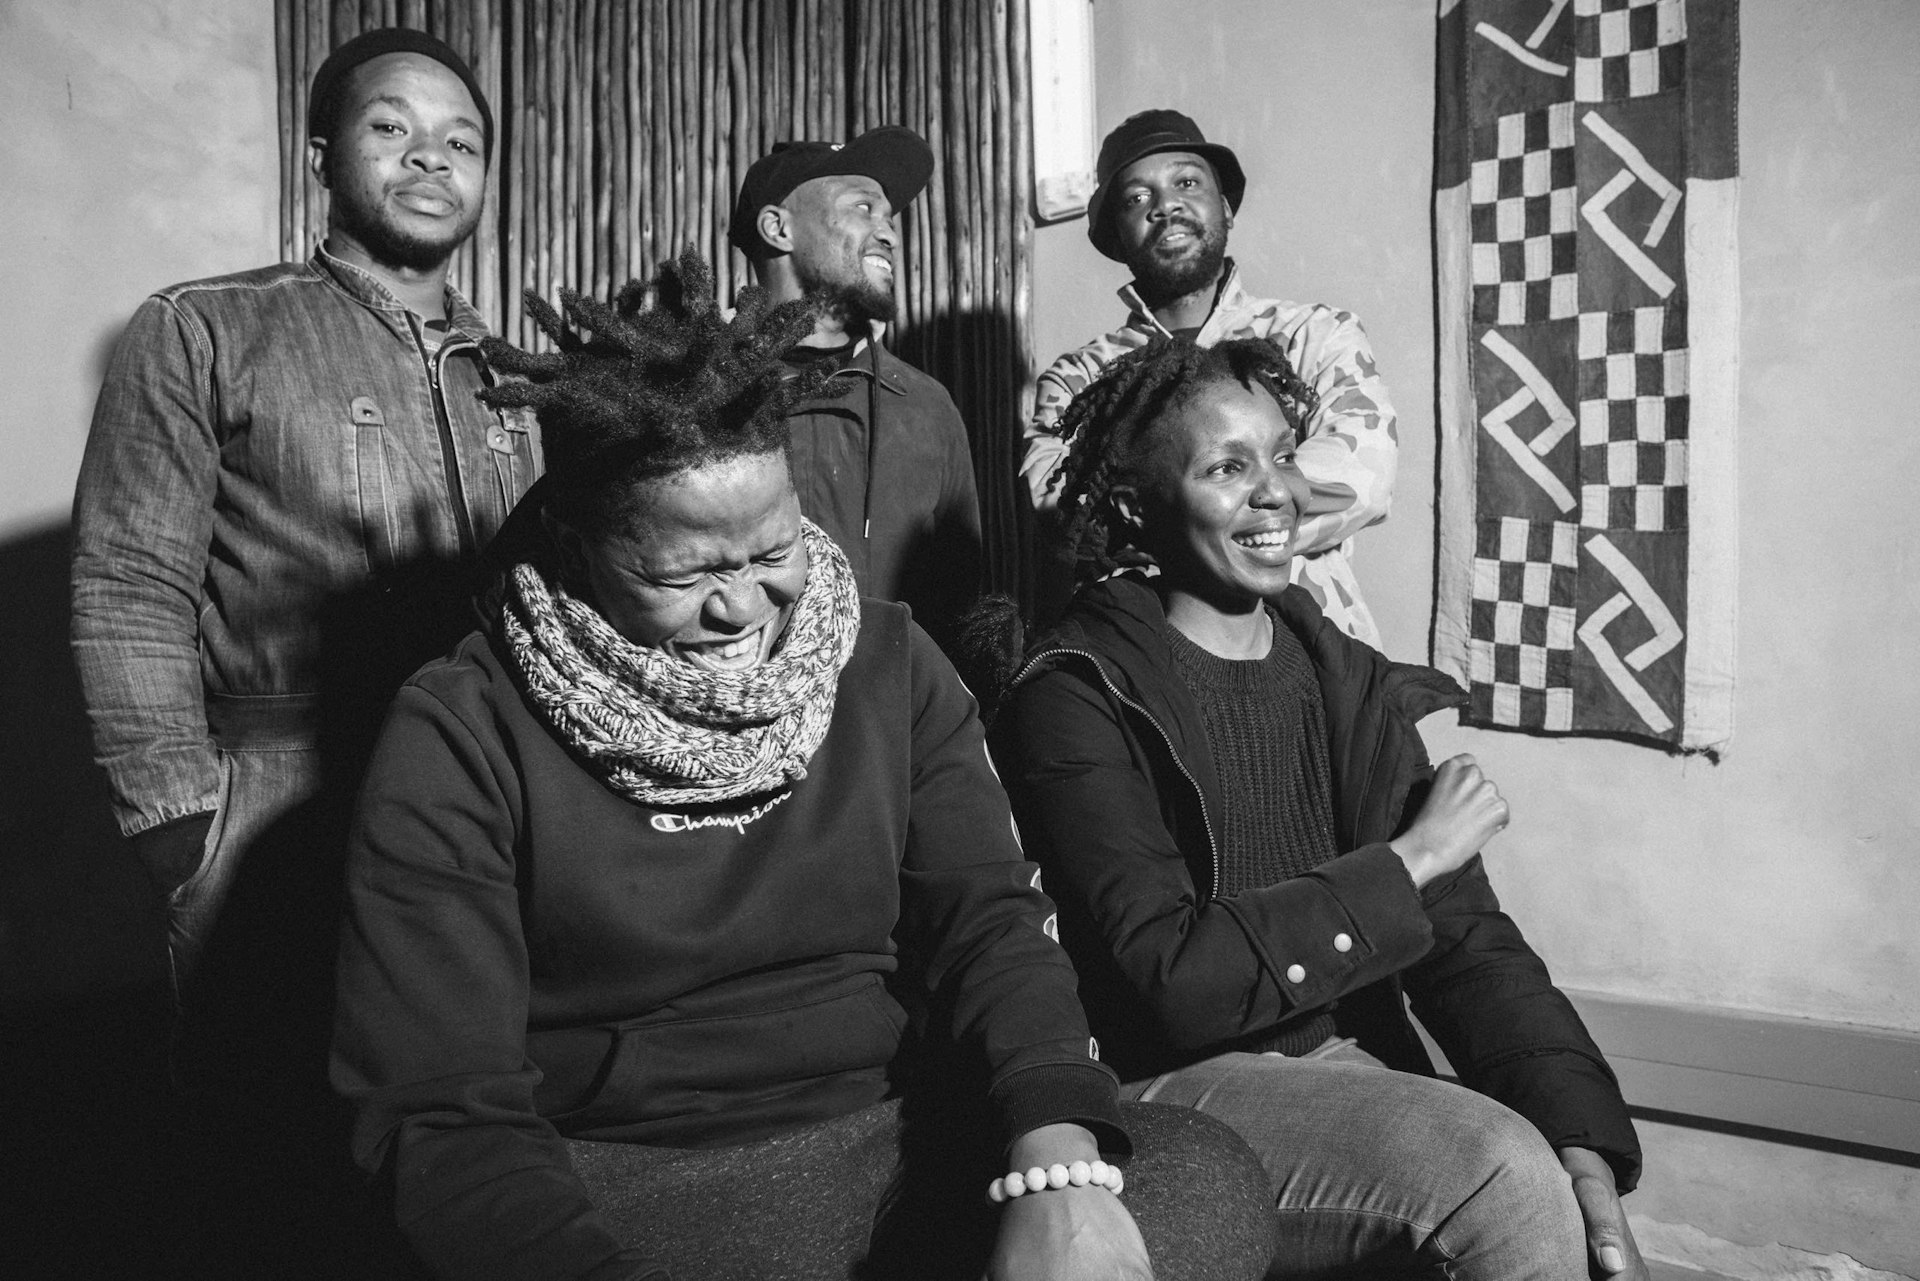 South Africa’s jazz upstarts are imagining a new nation